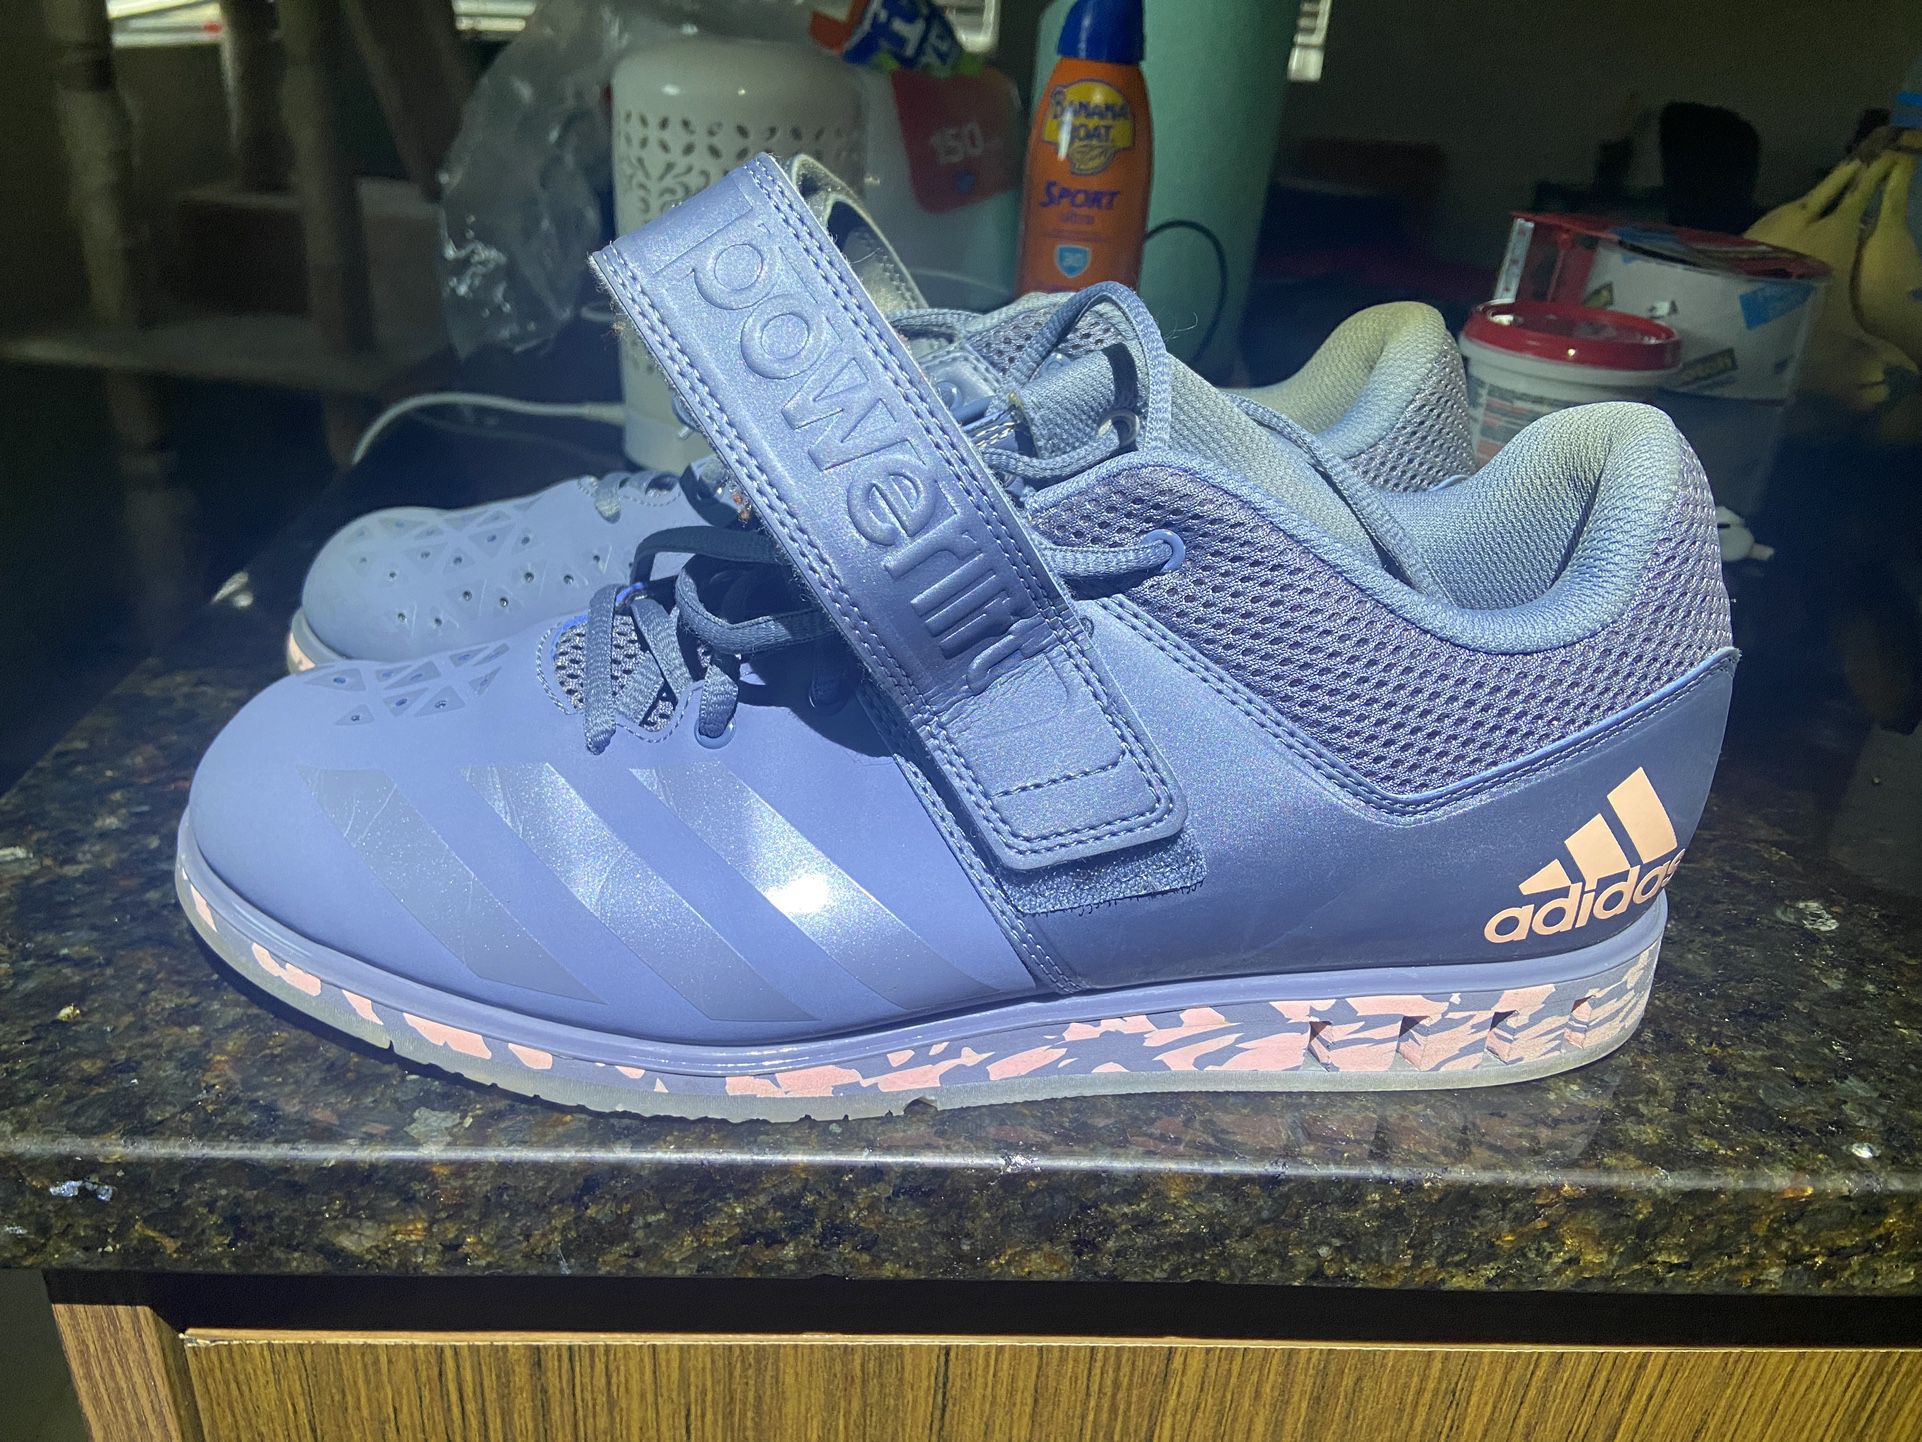 Adidas Powerlift AC7471 Mens for in Tampa, FL - OfferUp